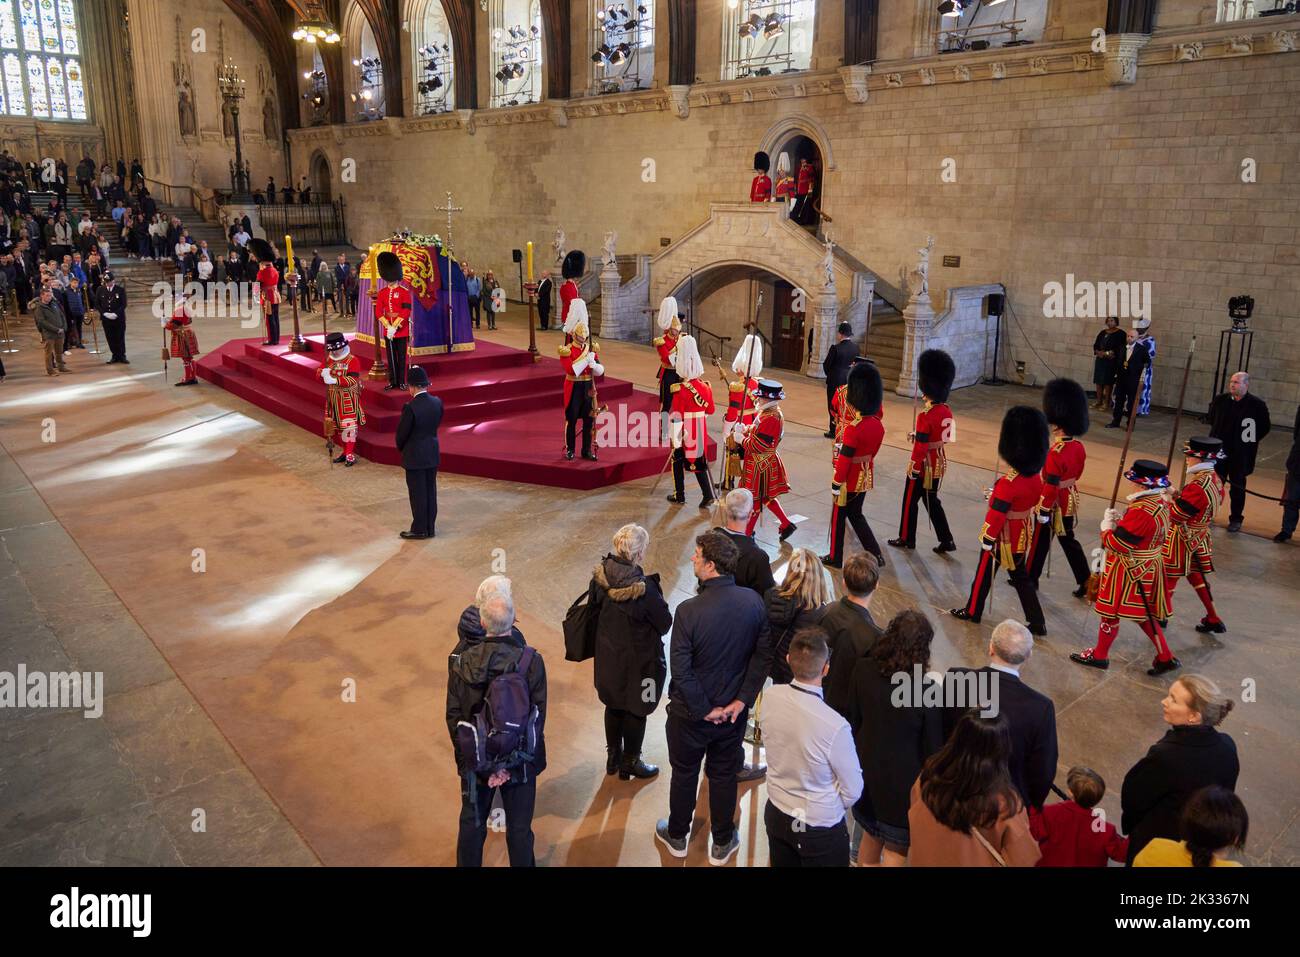 Queen Elizabeth II - Lying in State at Westminster Hall London. UK. 14-19 September 2022 Photo: ©Phil Crow 2022 Stock Photo